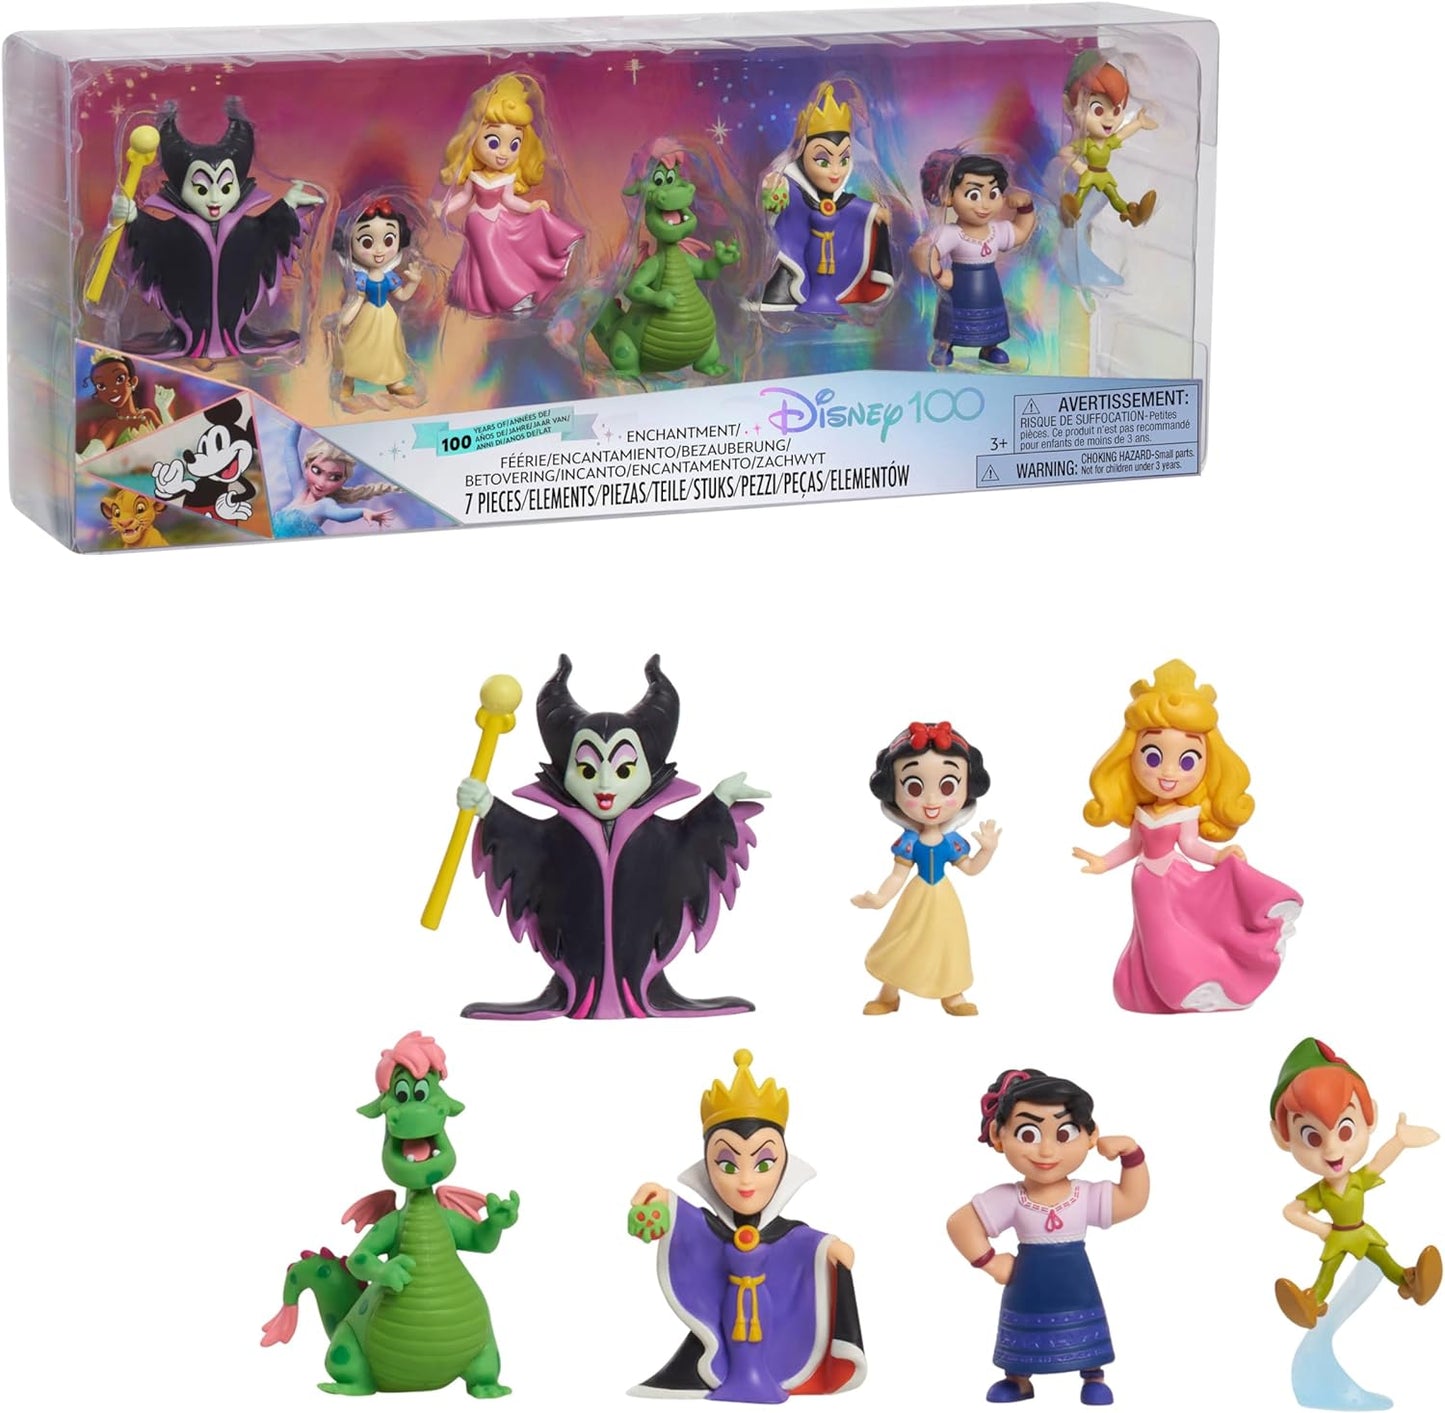 Disney 100 Years Anniversary Figure Collection